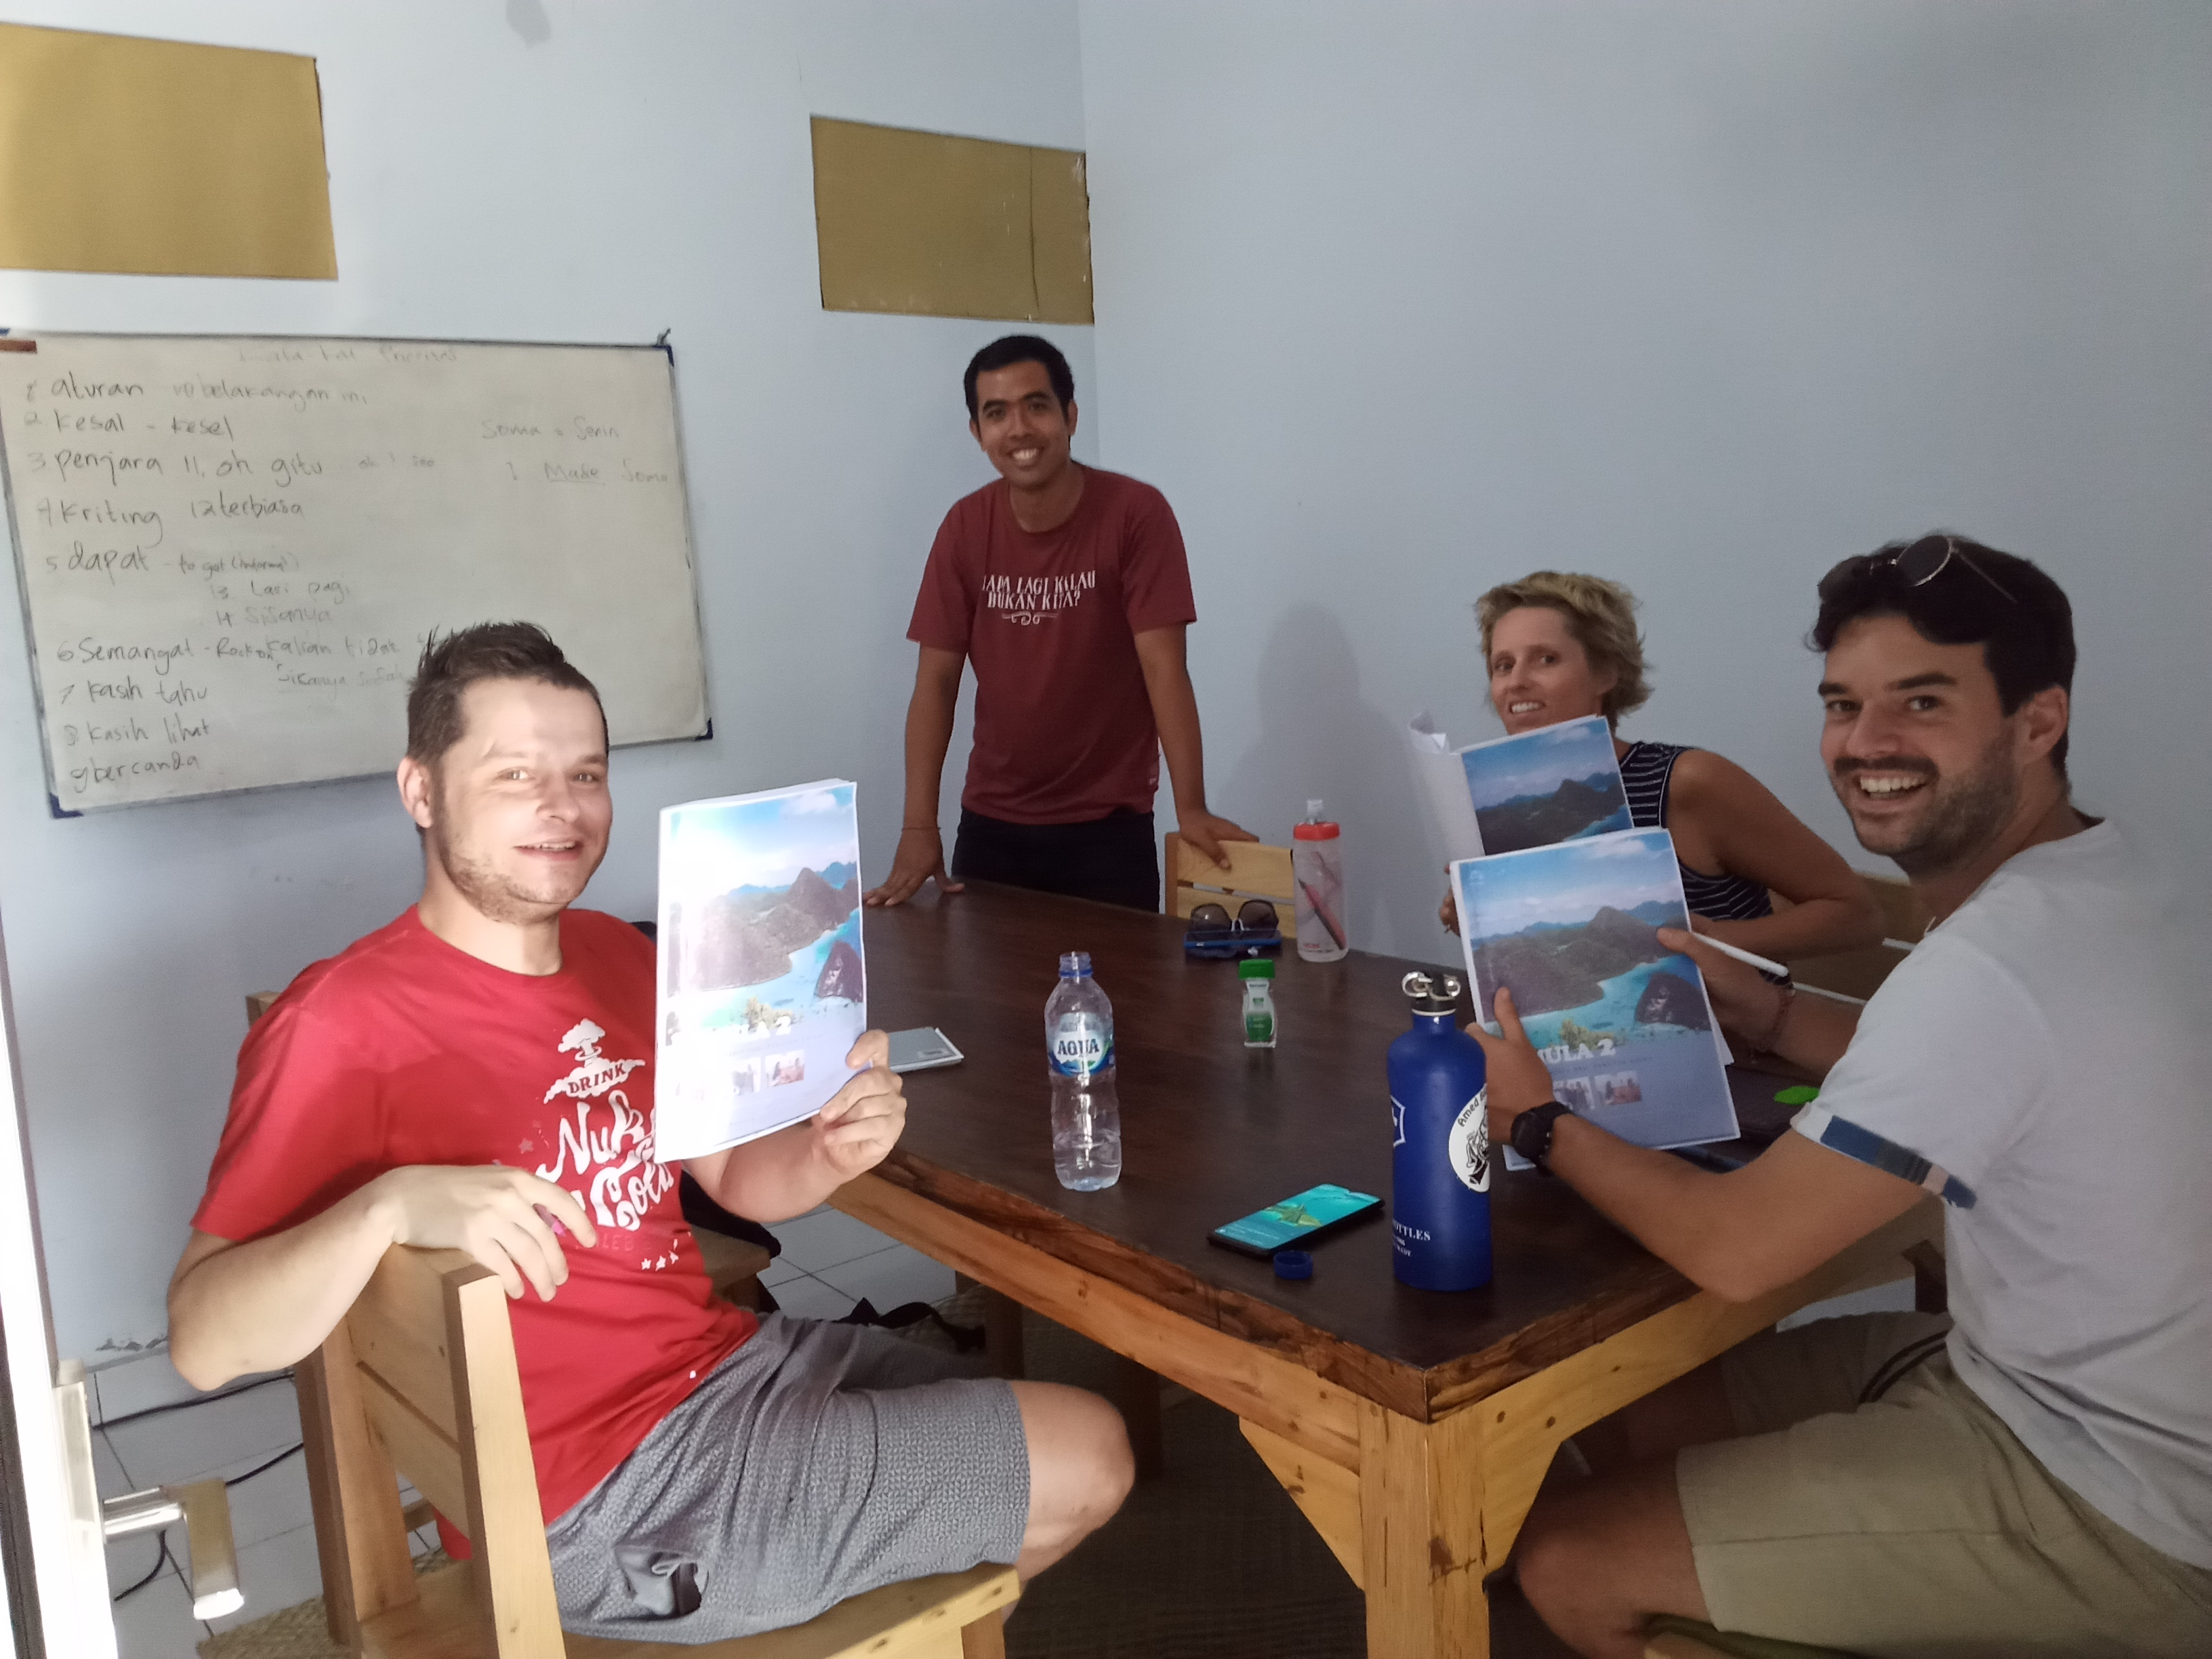 Indonesian language course - Small group